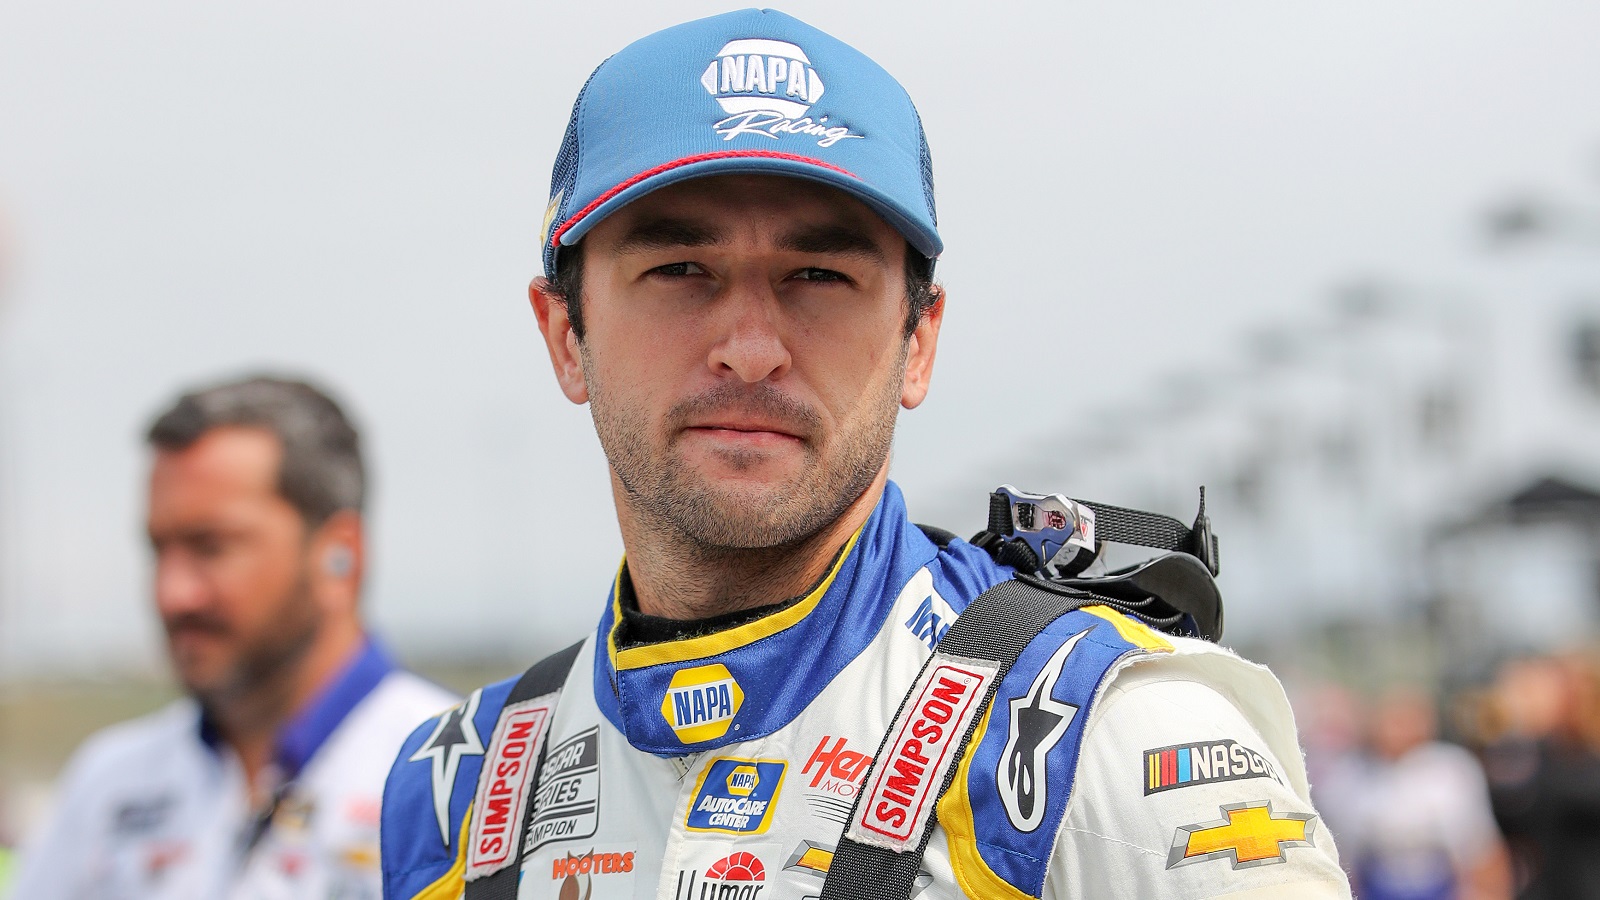 Chase Elliott looks on during qualifying for the NASCAR Cup Series Hollywood Casino 400 at Kansas Speedway on Sept. 10, 2022.